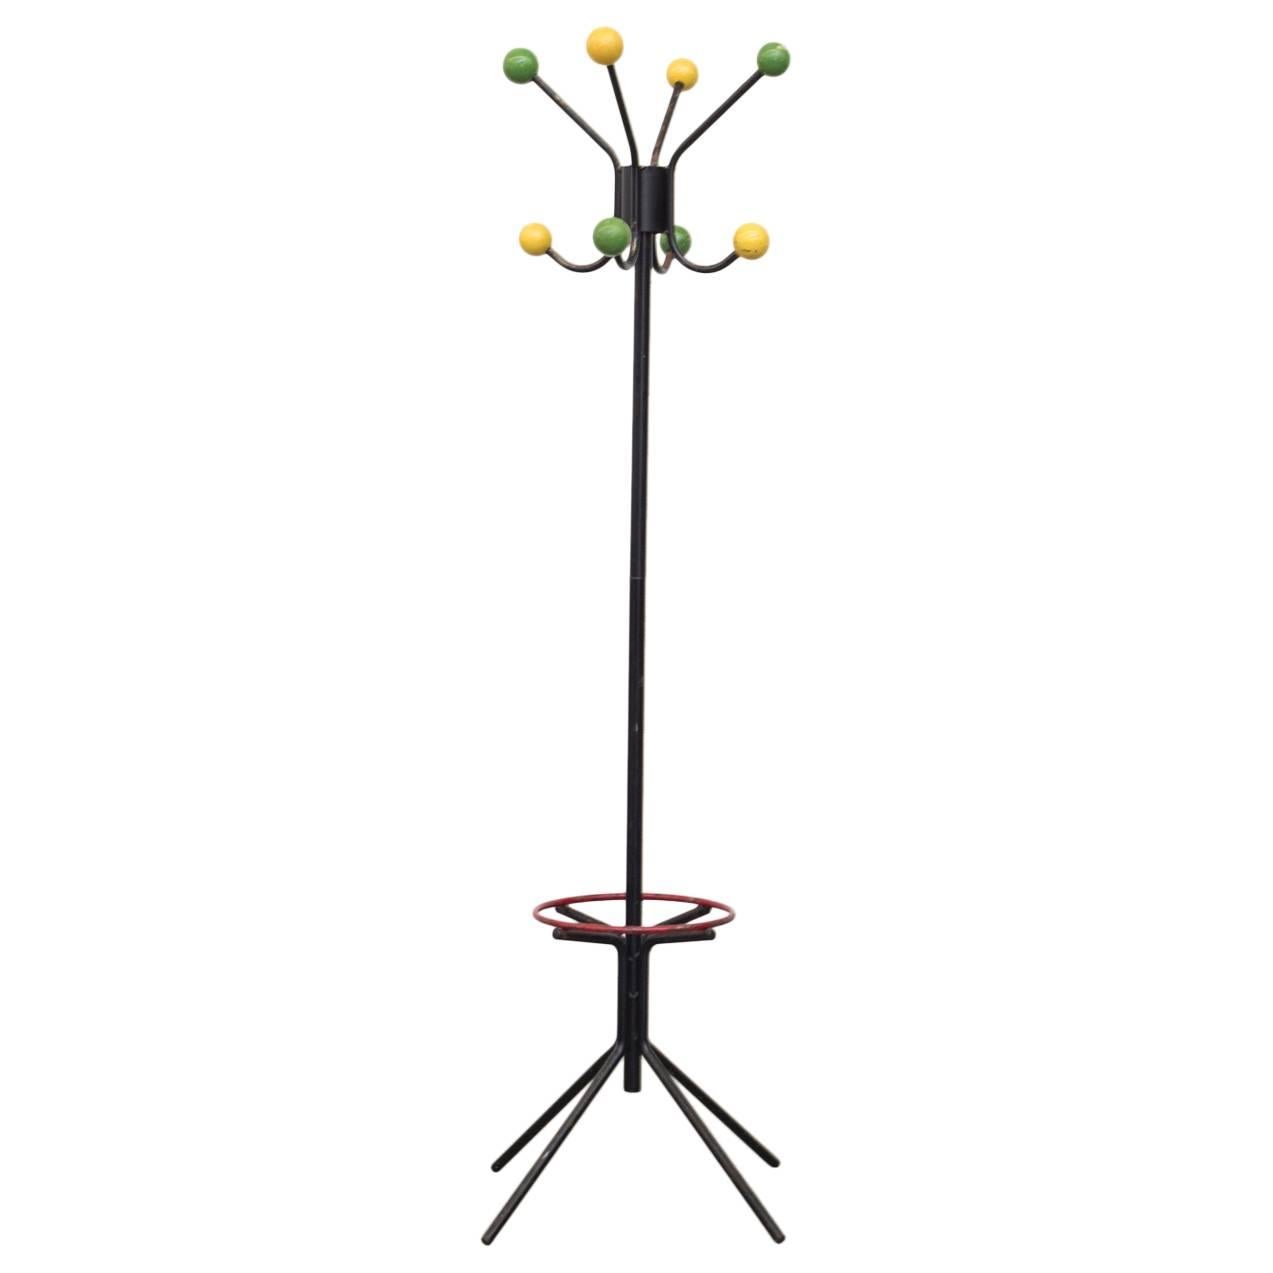 French Style 1950s Coat Rack with Colored Wood Ball Hooks